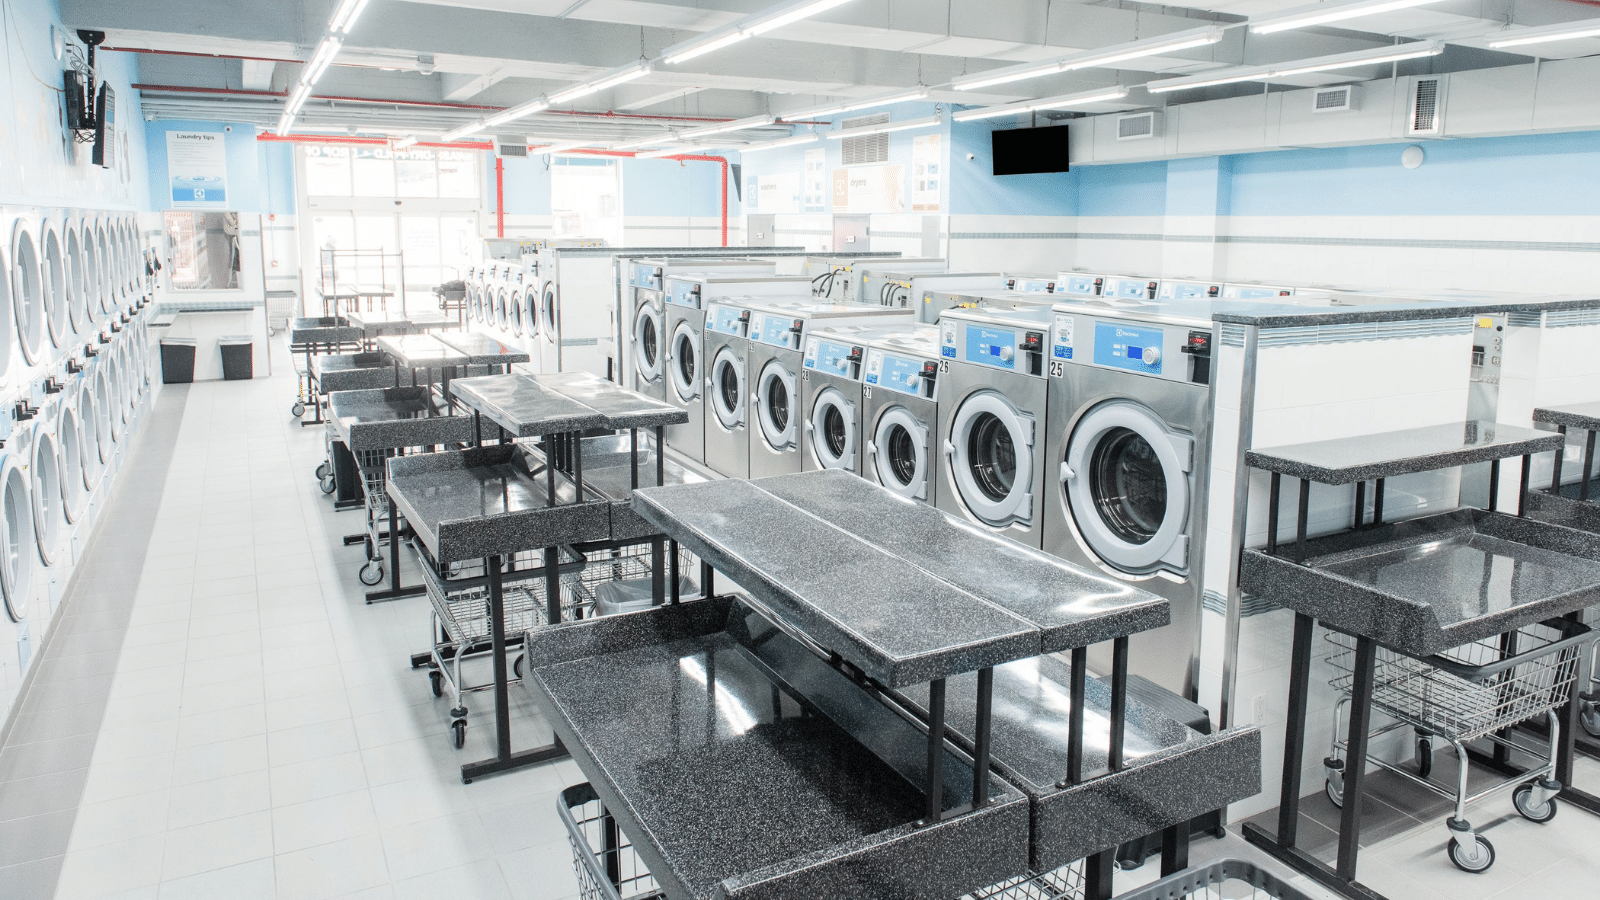 Planning for Laundry Success in 2022